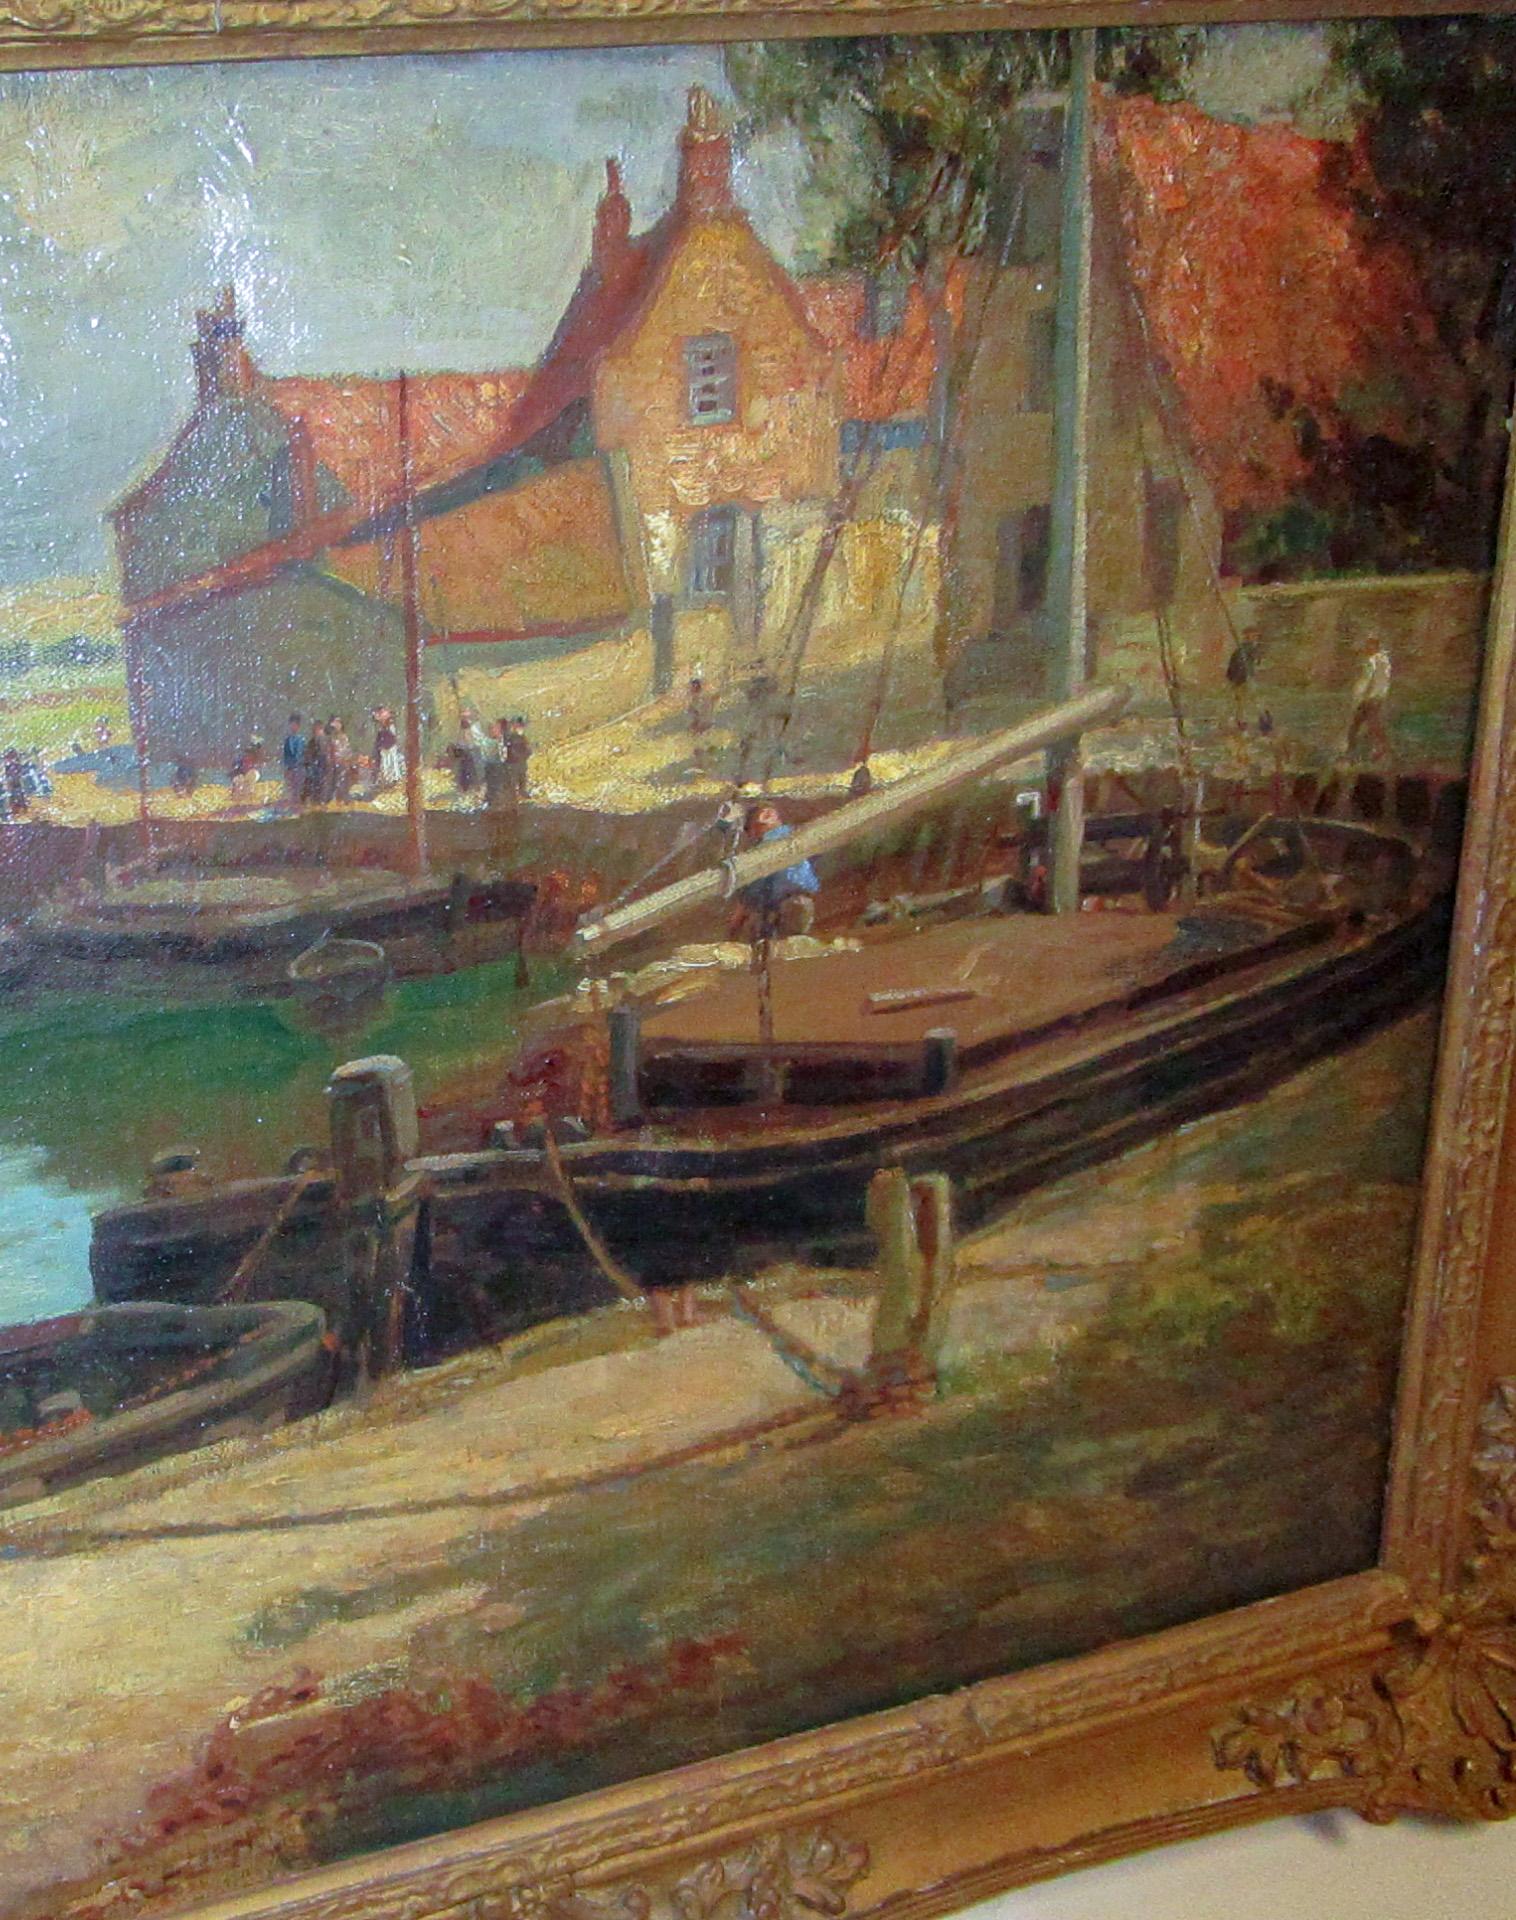 Early 20th c English School Oil Painting Dock & Fishing Boats by Frederick Stead For Sale 1